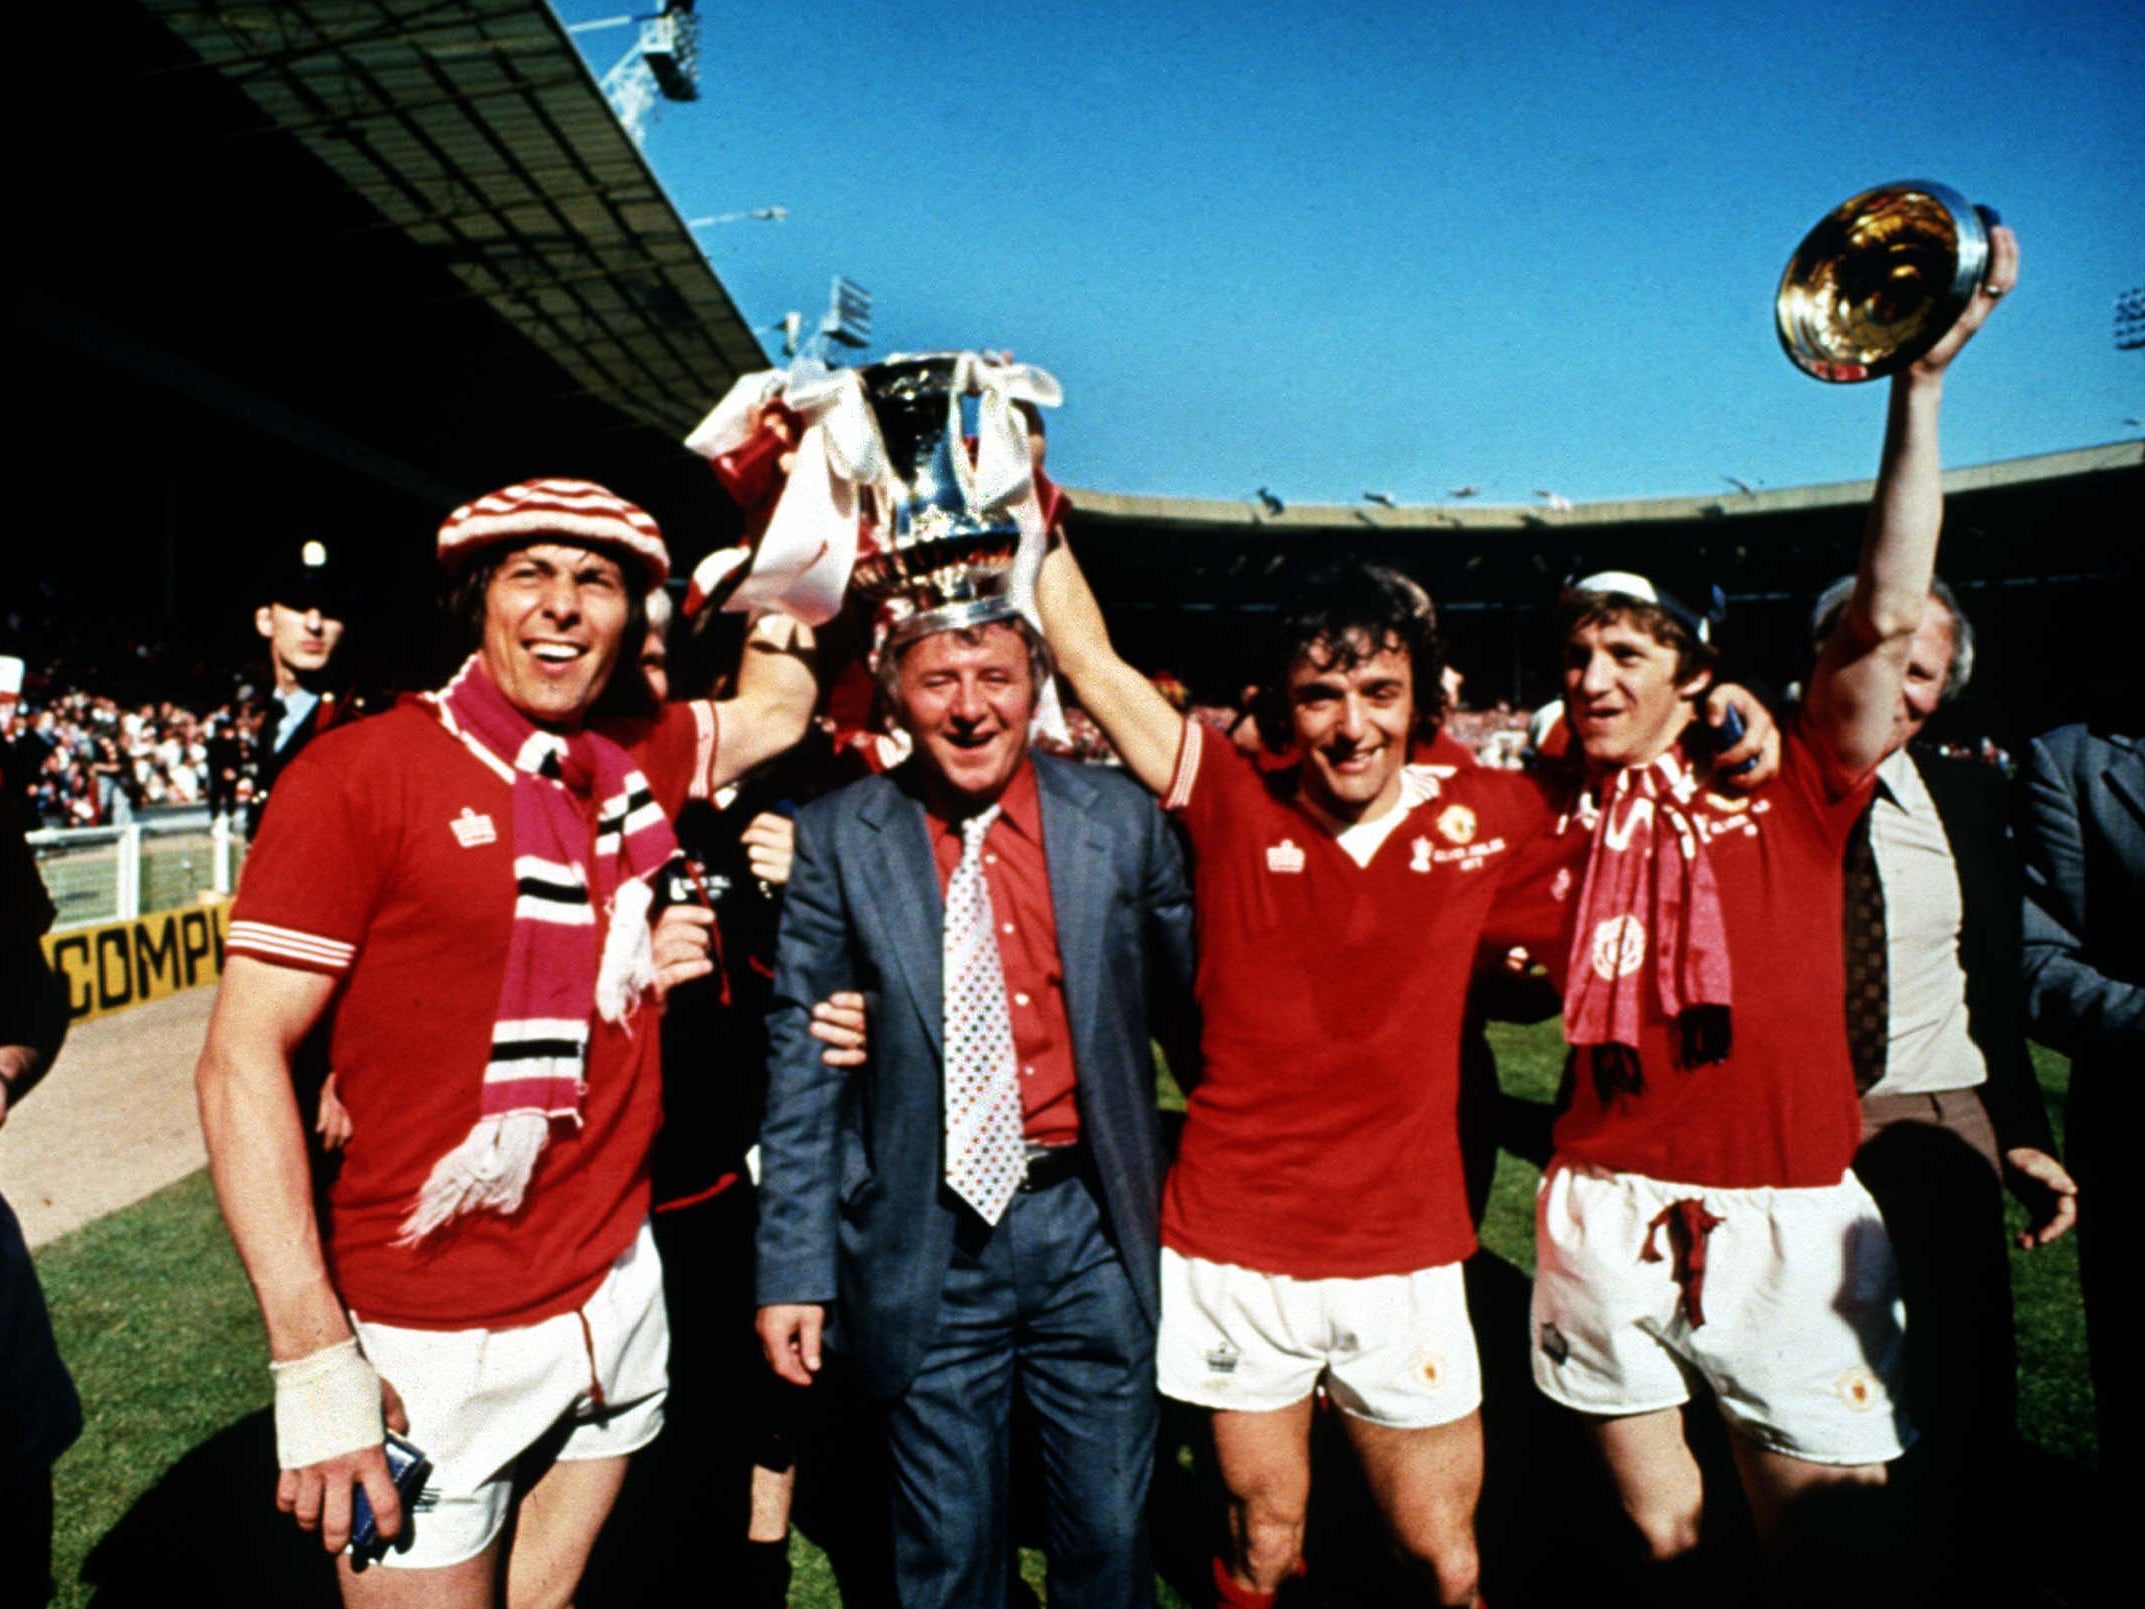 Docherty (second from left) parades the 1977 FA Cup trophy alongside Stuart Pearson, Lou Macari and Gordon Hill